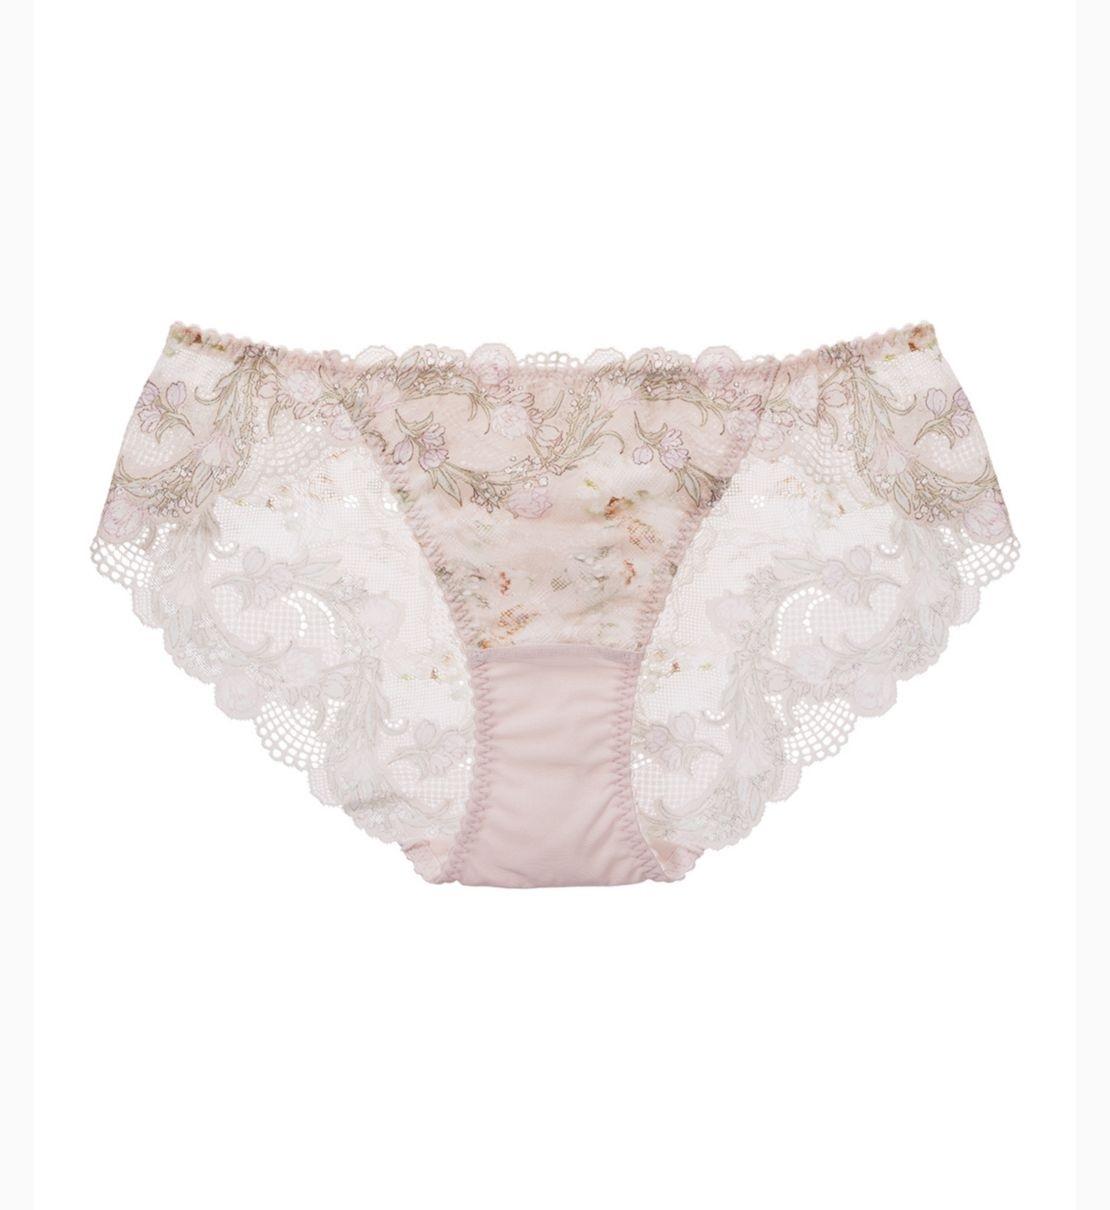 Peachy Cleavage Printed Stretch Lace Shorts